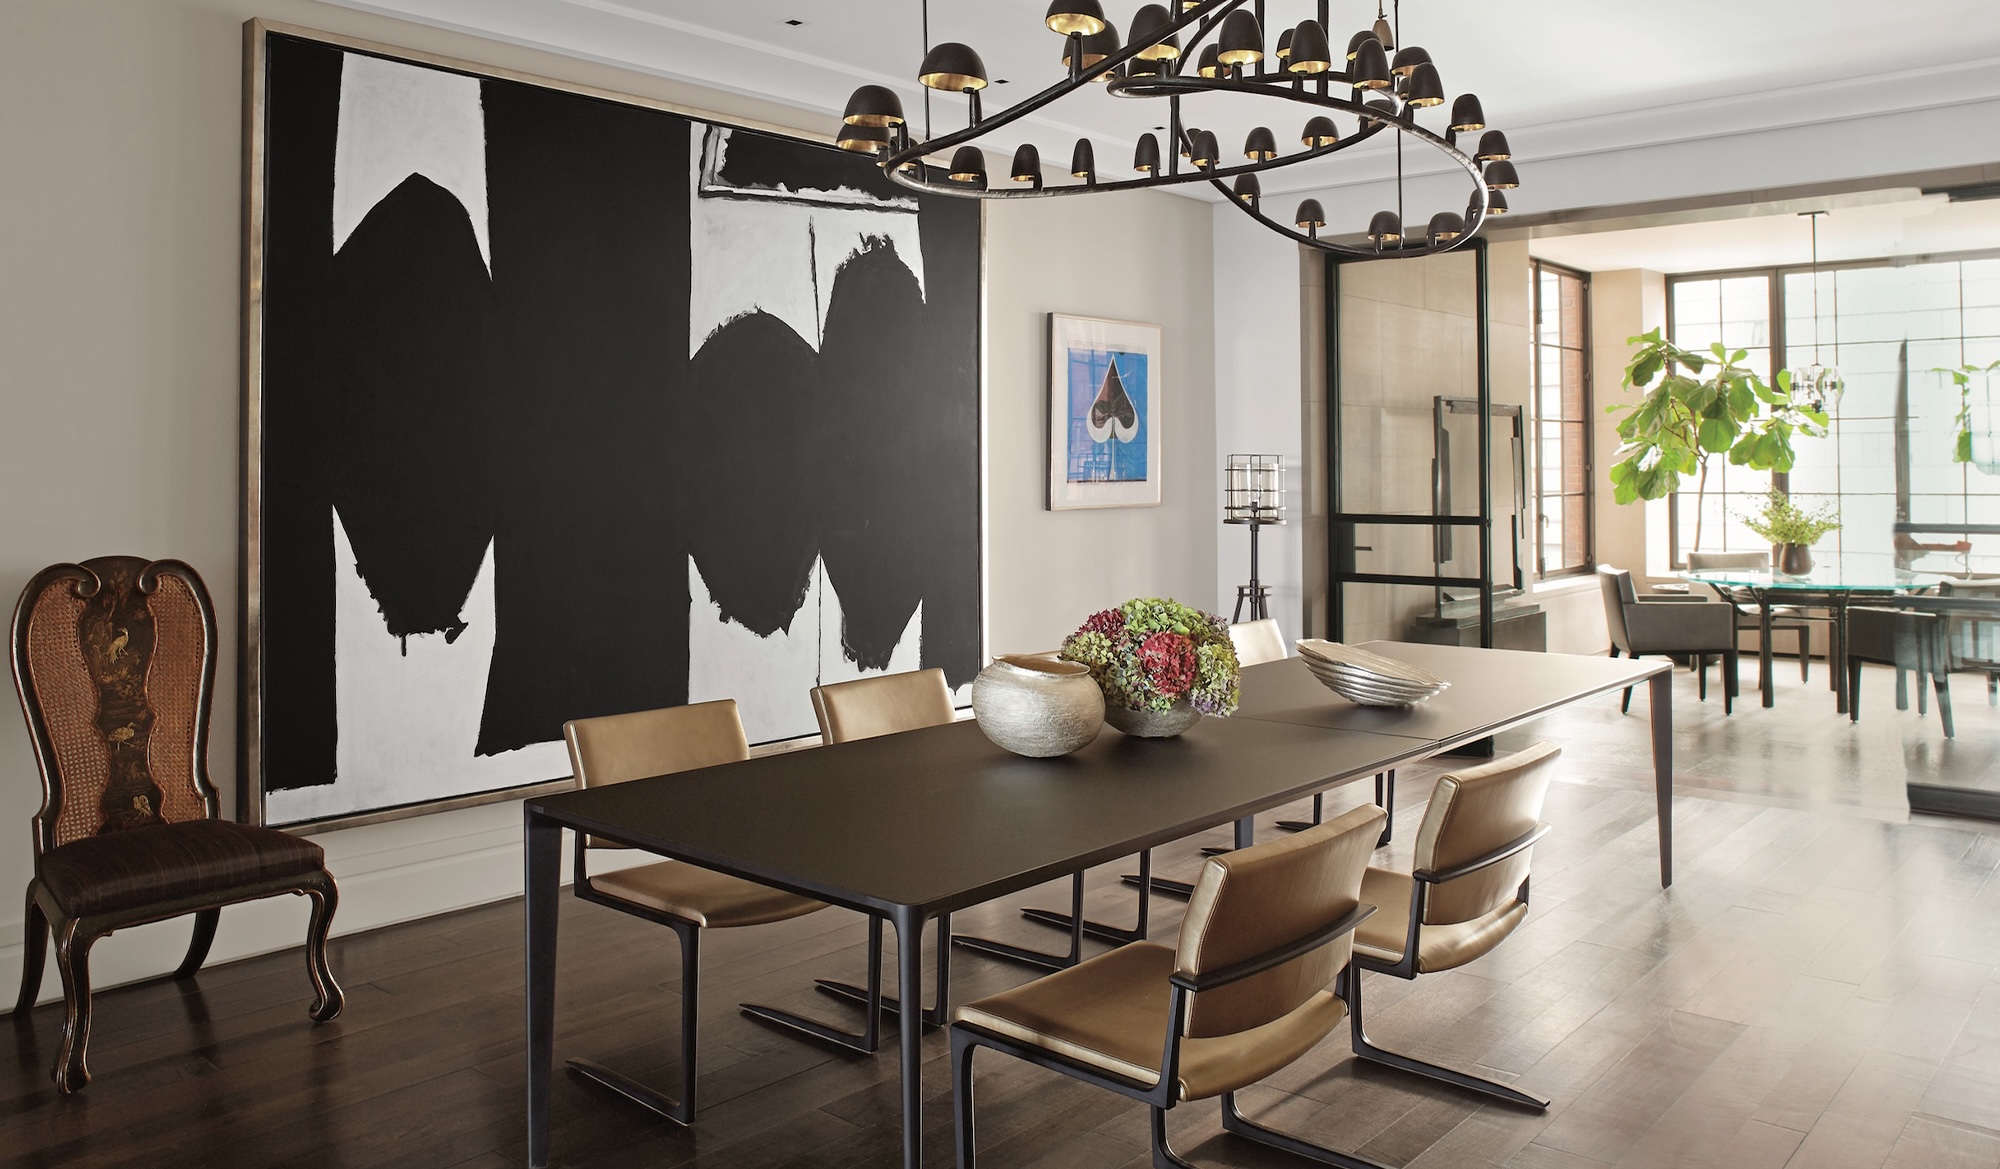 House-of-Hunt-Interior-Design-Chicago-Dining-Room-With-Large-Wall-Art